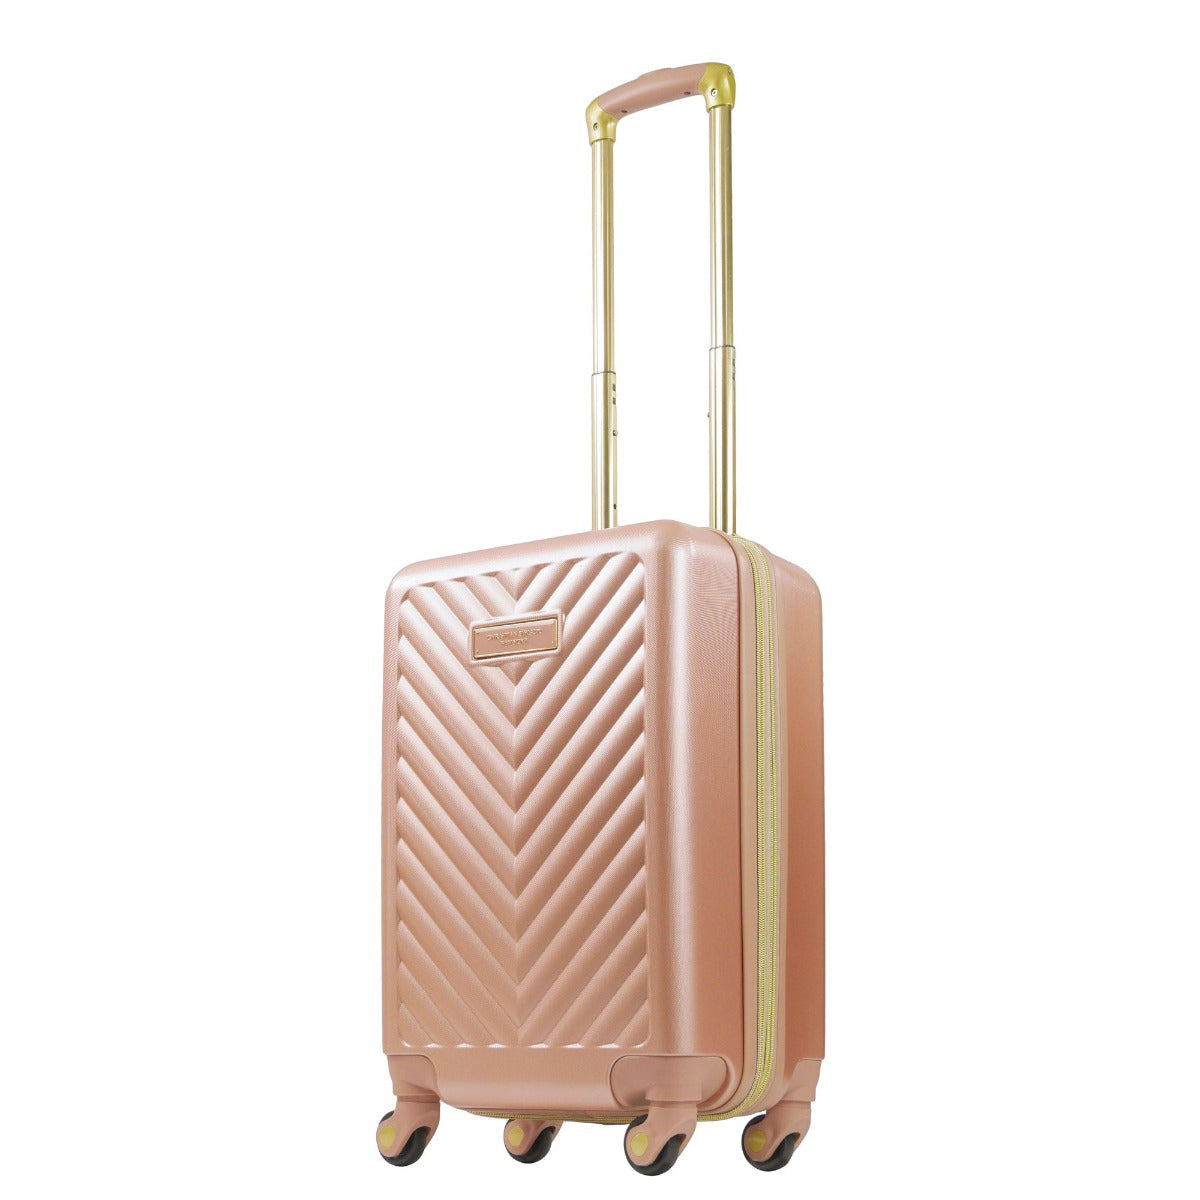 Christian Siriano Addie 22" hardside spinner suitcase luggage rose gold - best carry on suitcases for travel